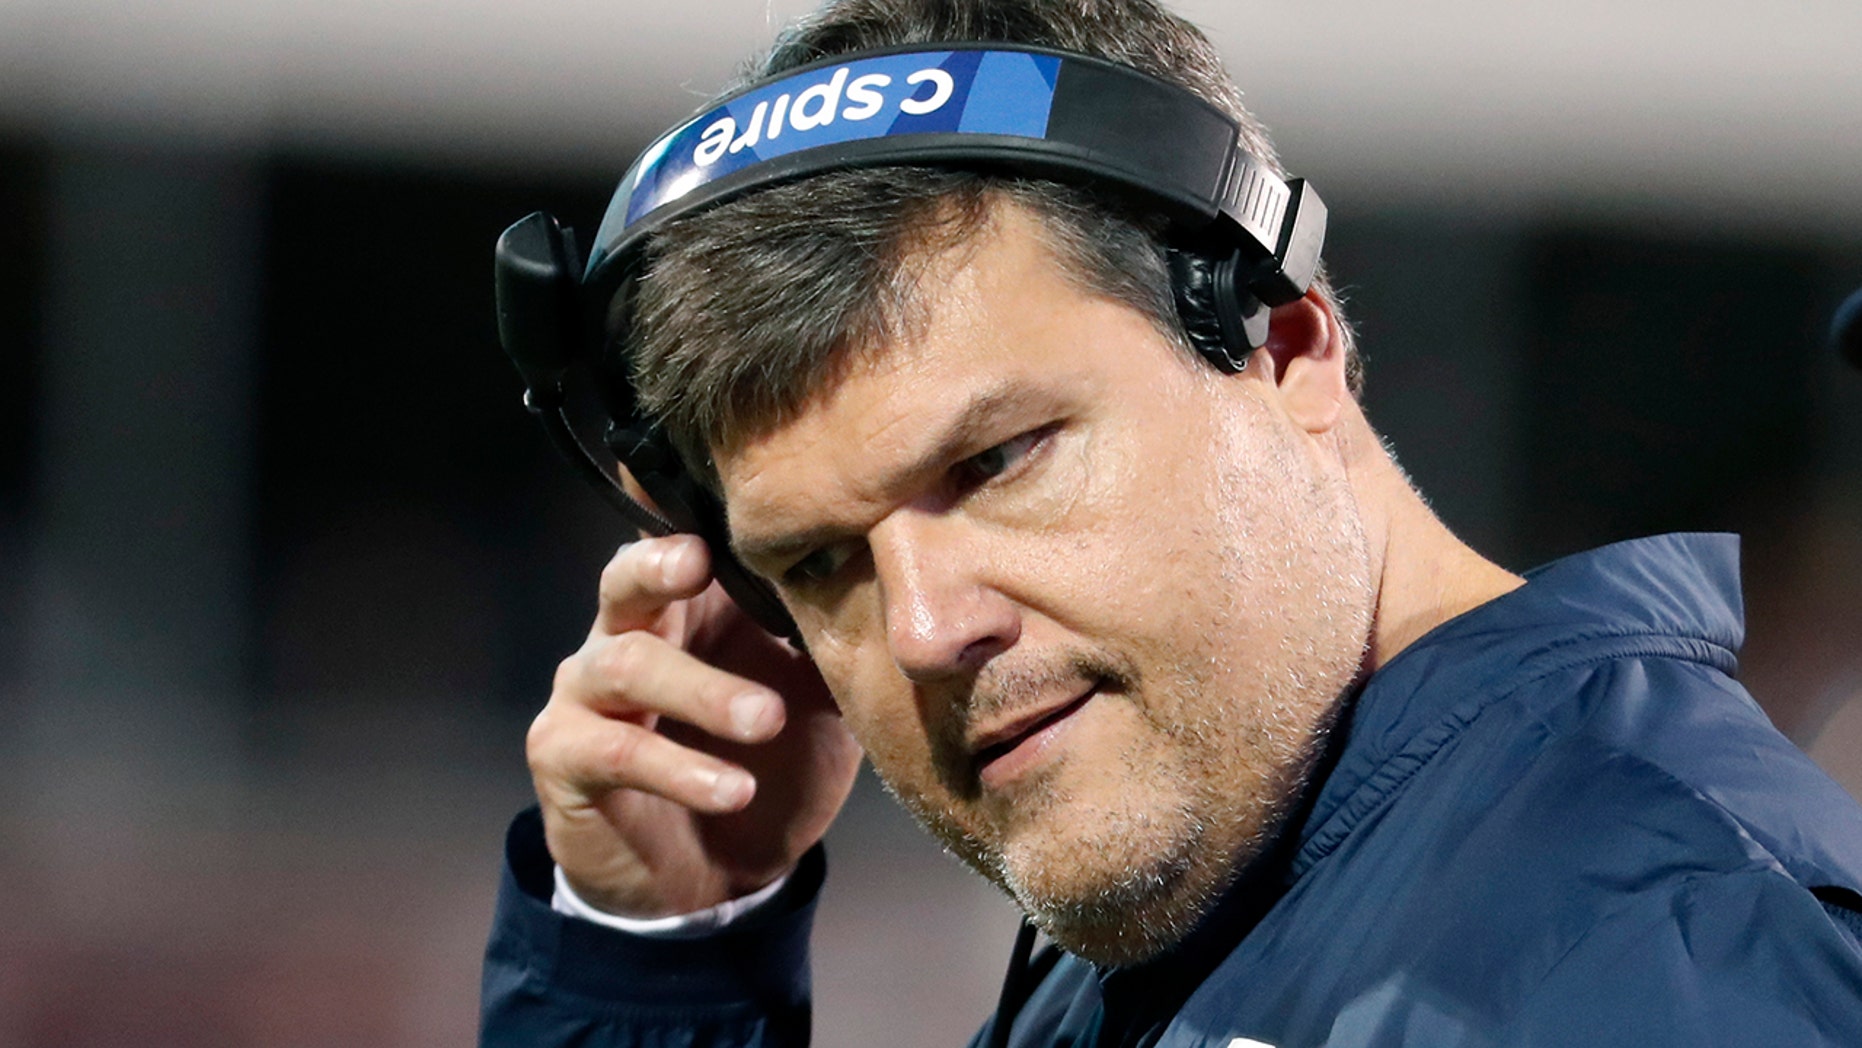 In this Nov. 28, 2019 photo, Mississippi head coach Matt Luke removes his headset during an NCAA college football game against Mississippi State, in Starkville, Miss. Mississippi has fired Luke, three days after his third non-winning season ended with an excruciating rivalry game loss. Athletic director Keith Carter said Sunday, Dec. 1, 2019 the decision to change coaches was made after evaluating the trajectory of the program and not seeing enough “momentum on the field.” (AP Photo/Rogelio V. Solis)